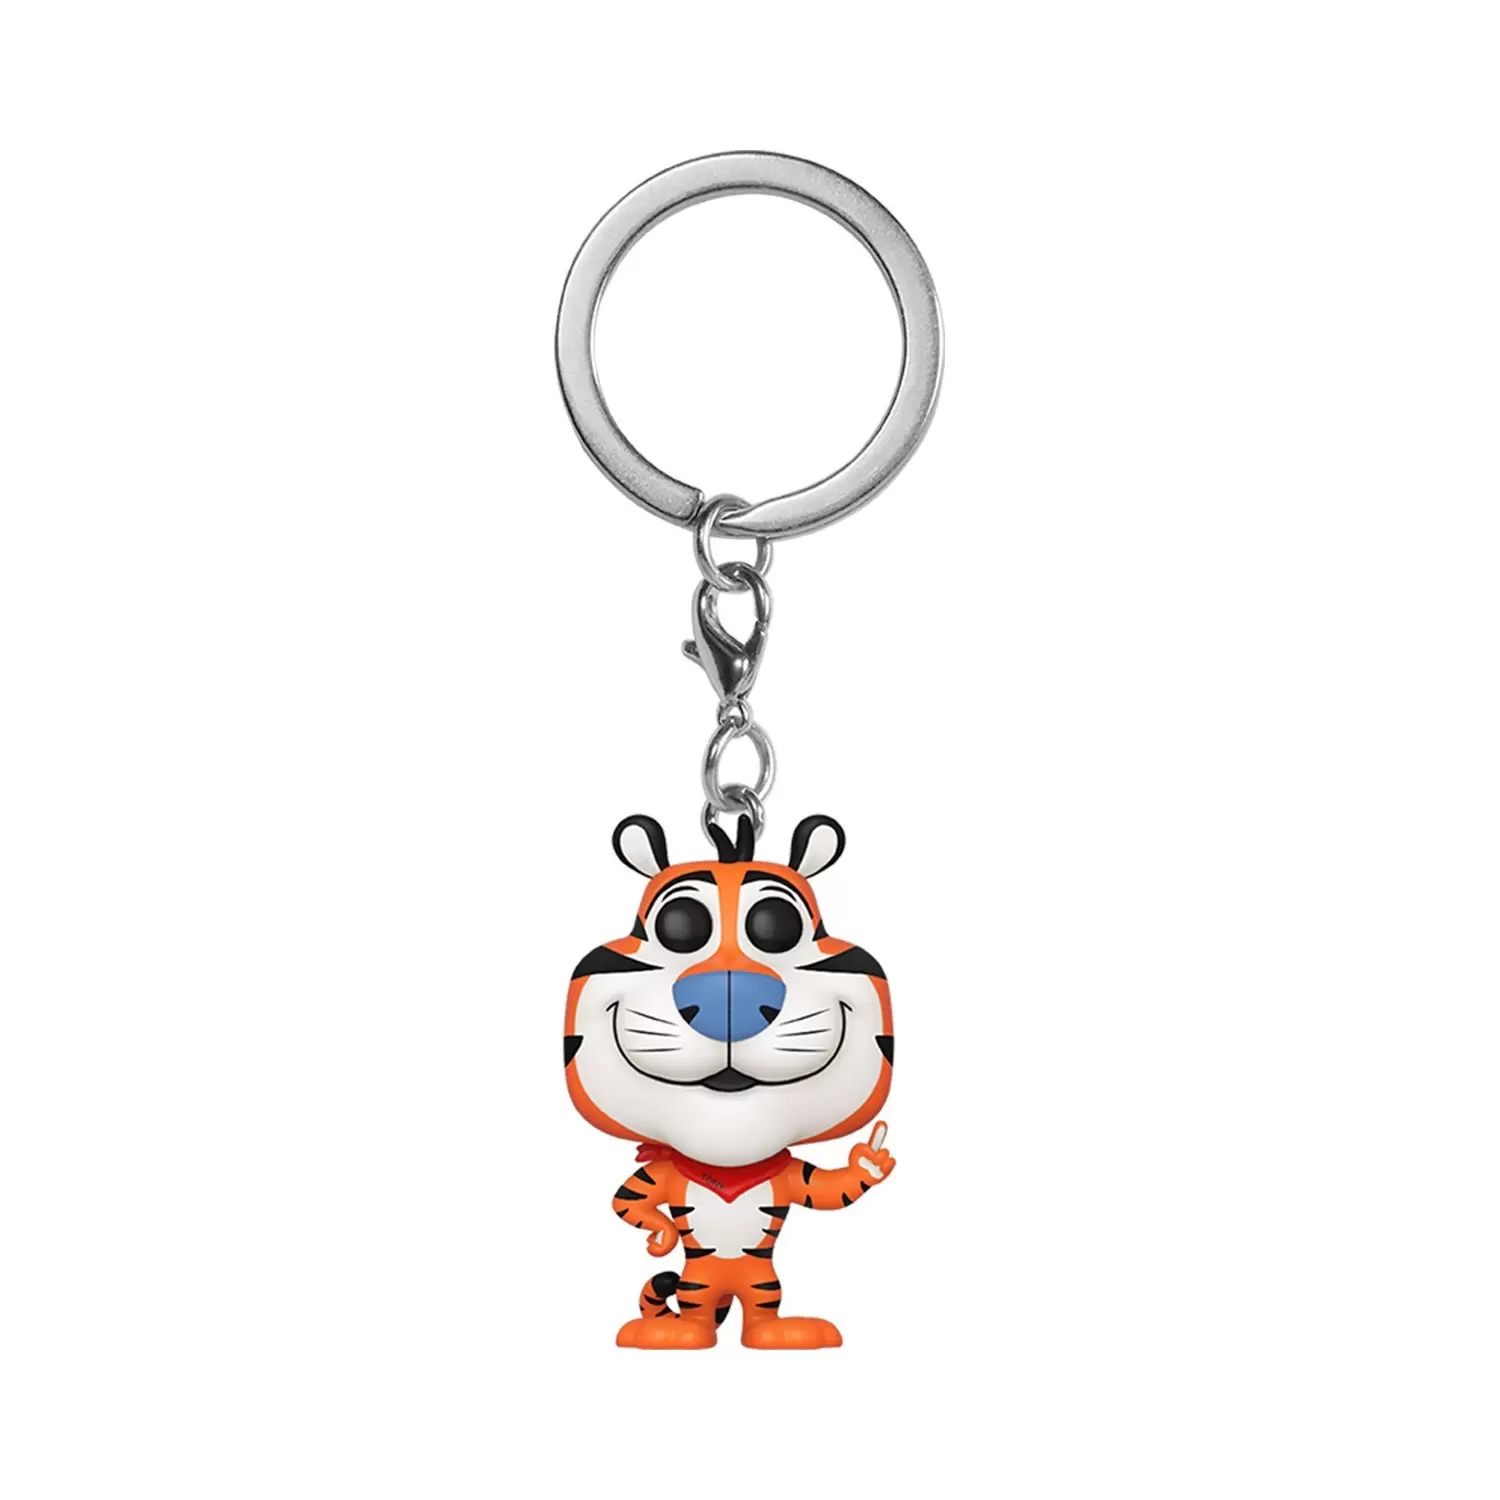 Others - POP! Keychain - Frosted Flakes - Tony the Tiger